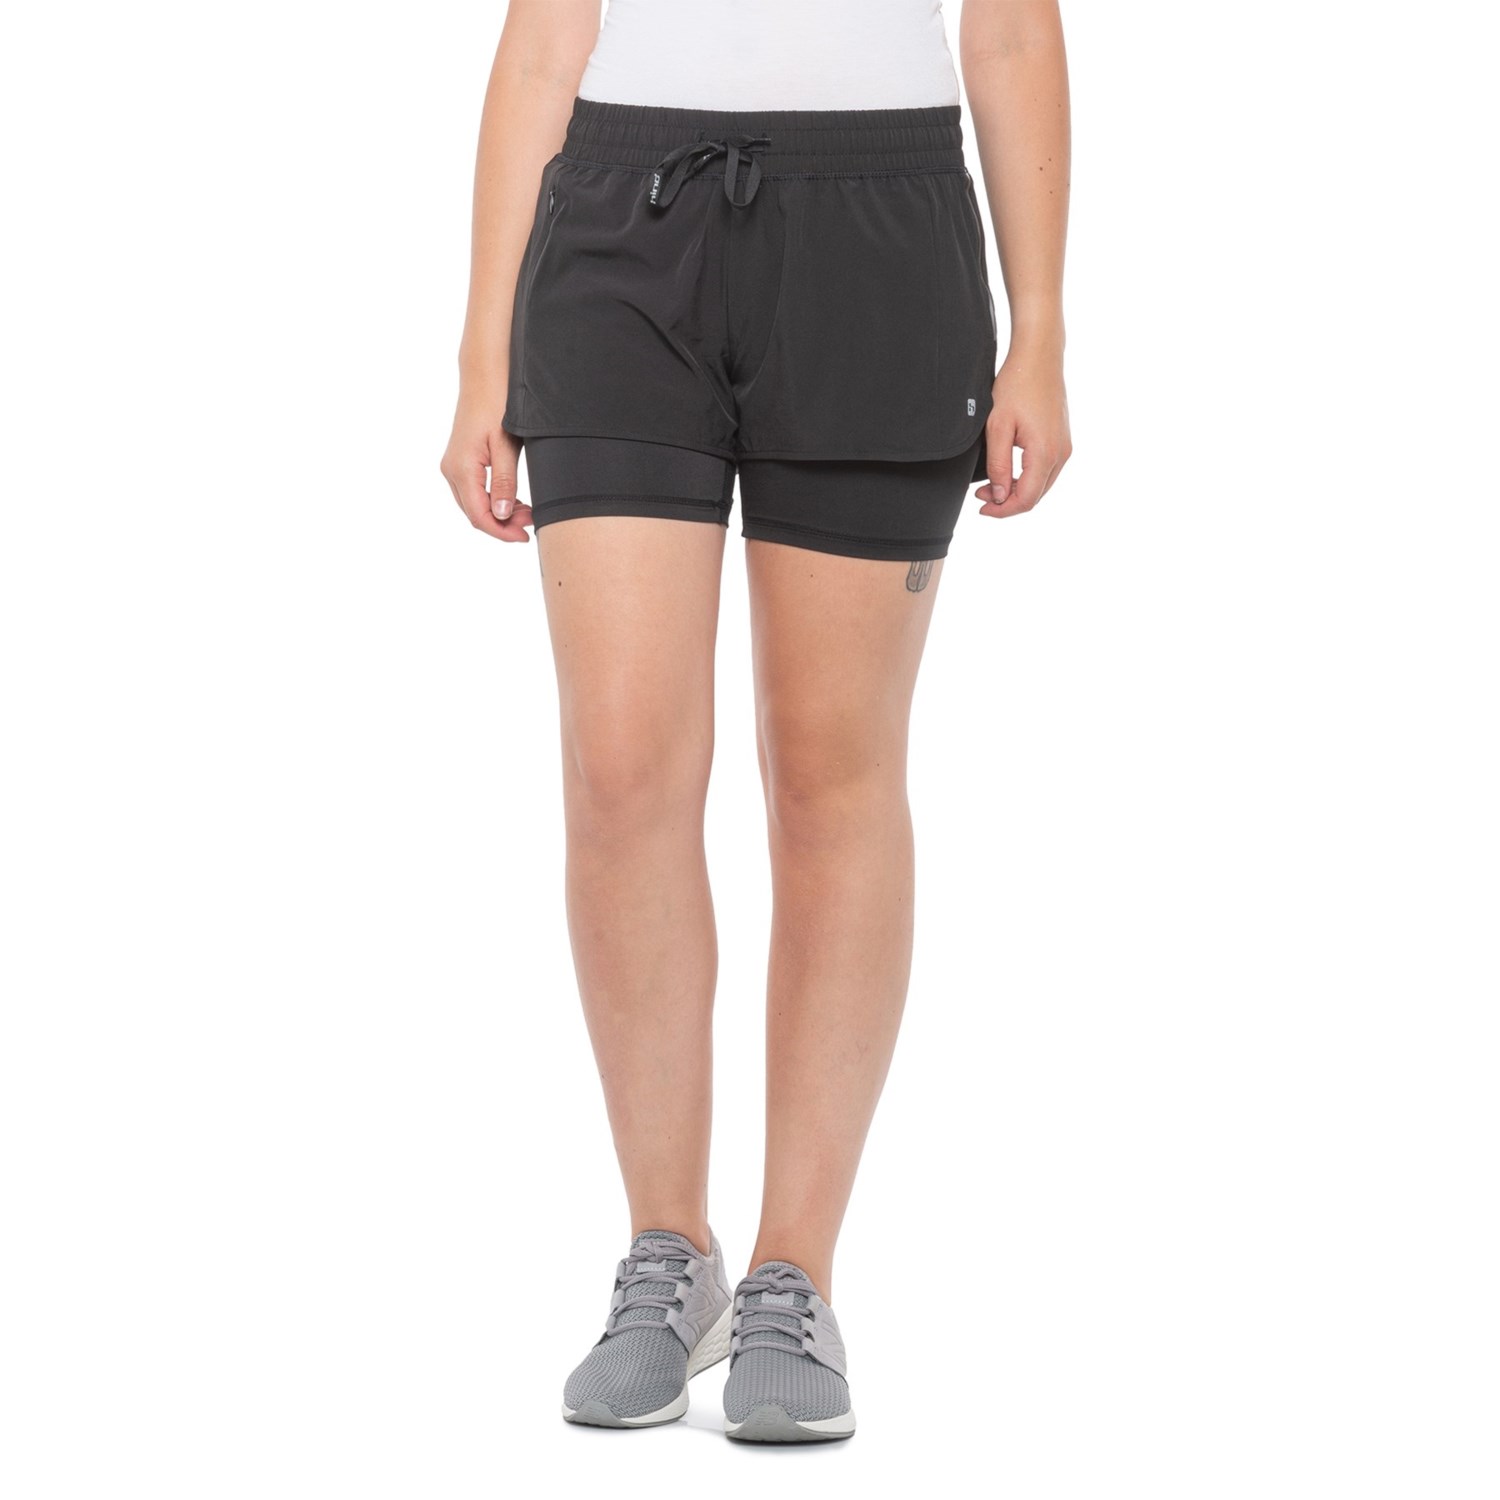 women's shorts with built in compression short